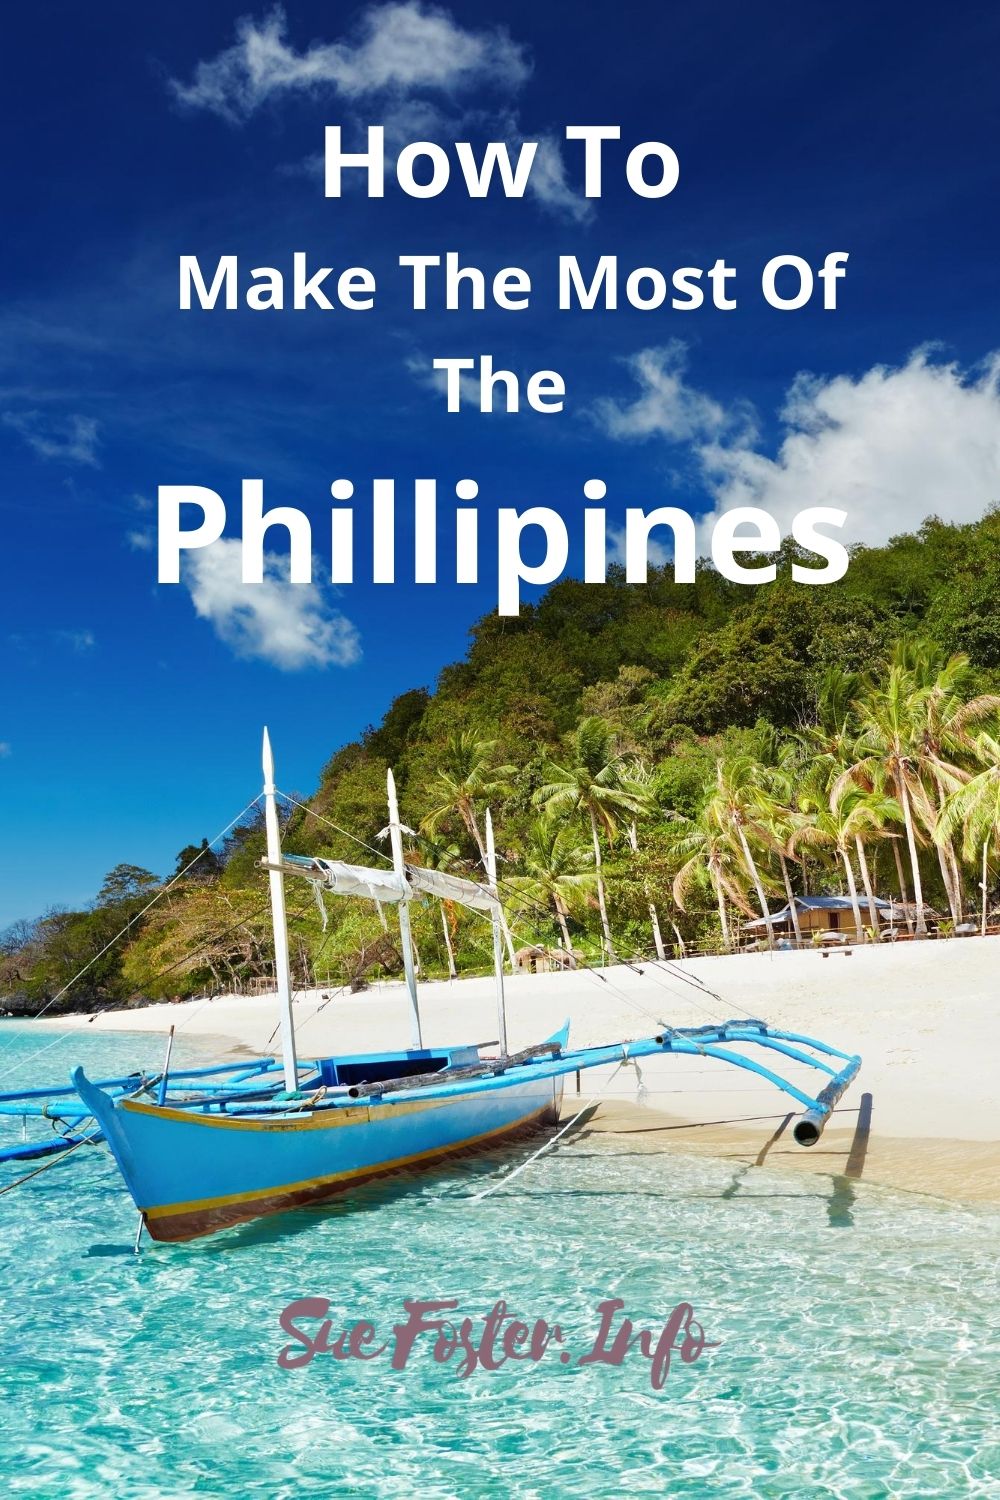 How-To-Make-The-Most-Of-The-Phillipines